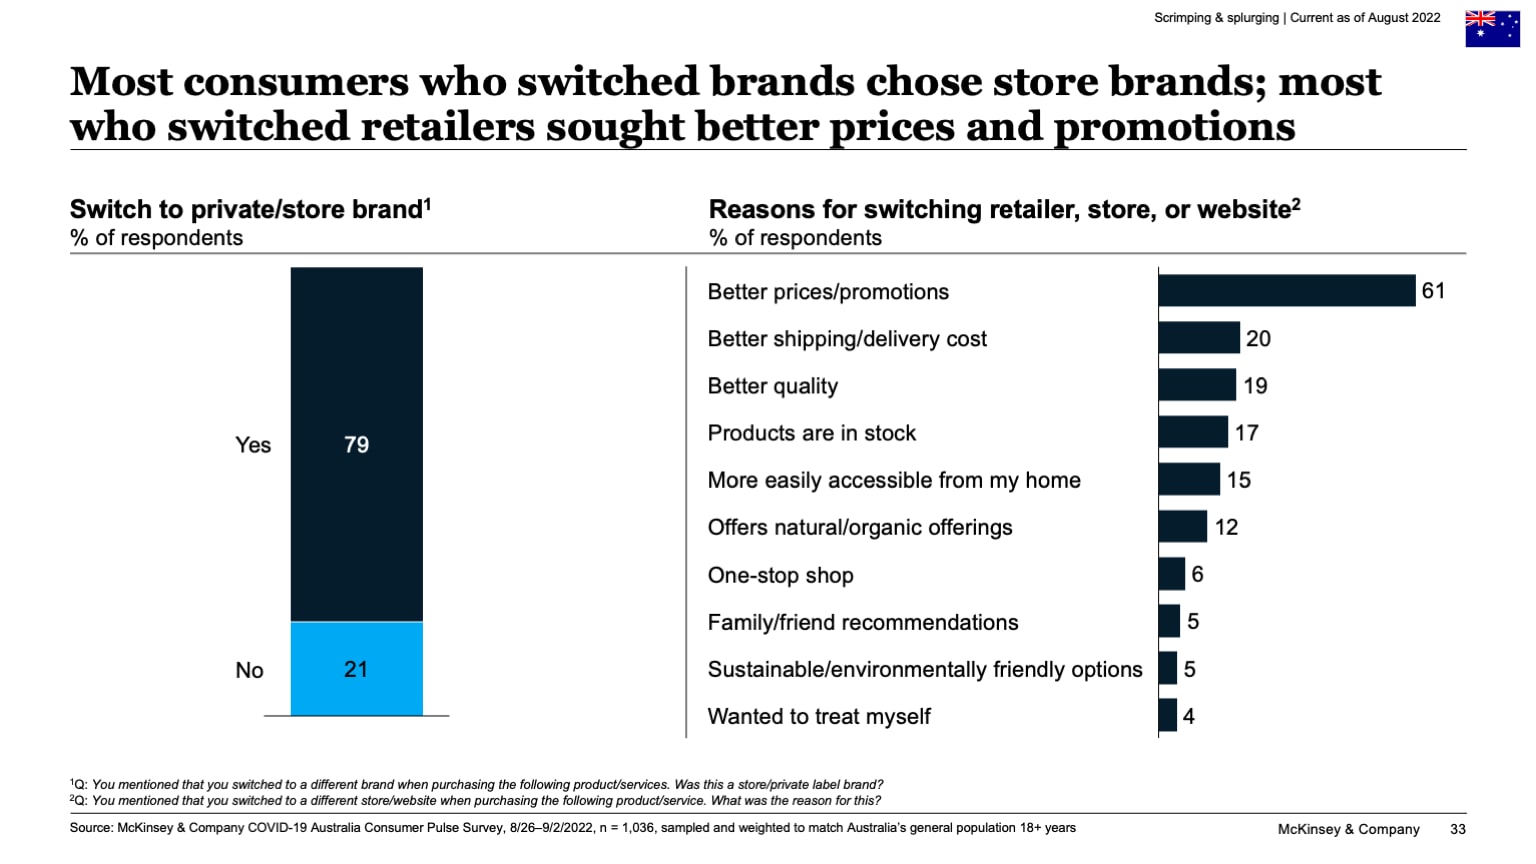 Most consumers who switched brands chose store brands; most who switched retailers sought better prices and promotions